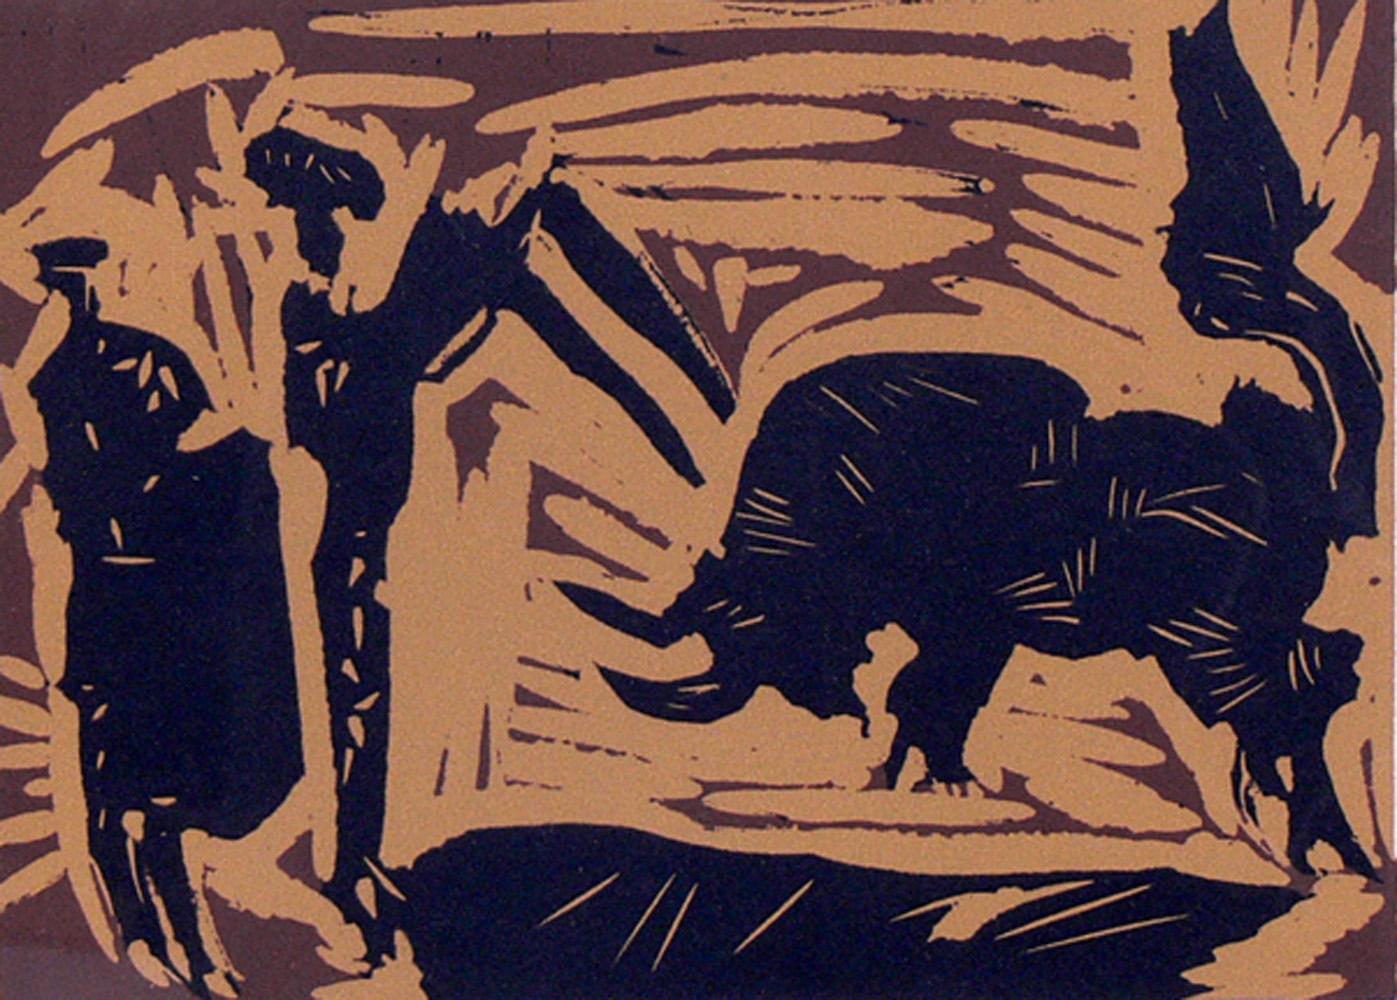 American Selection of Pablo Picasso Linocuts